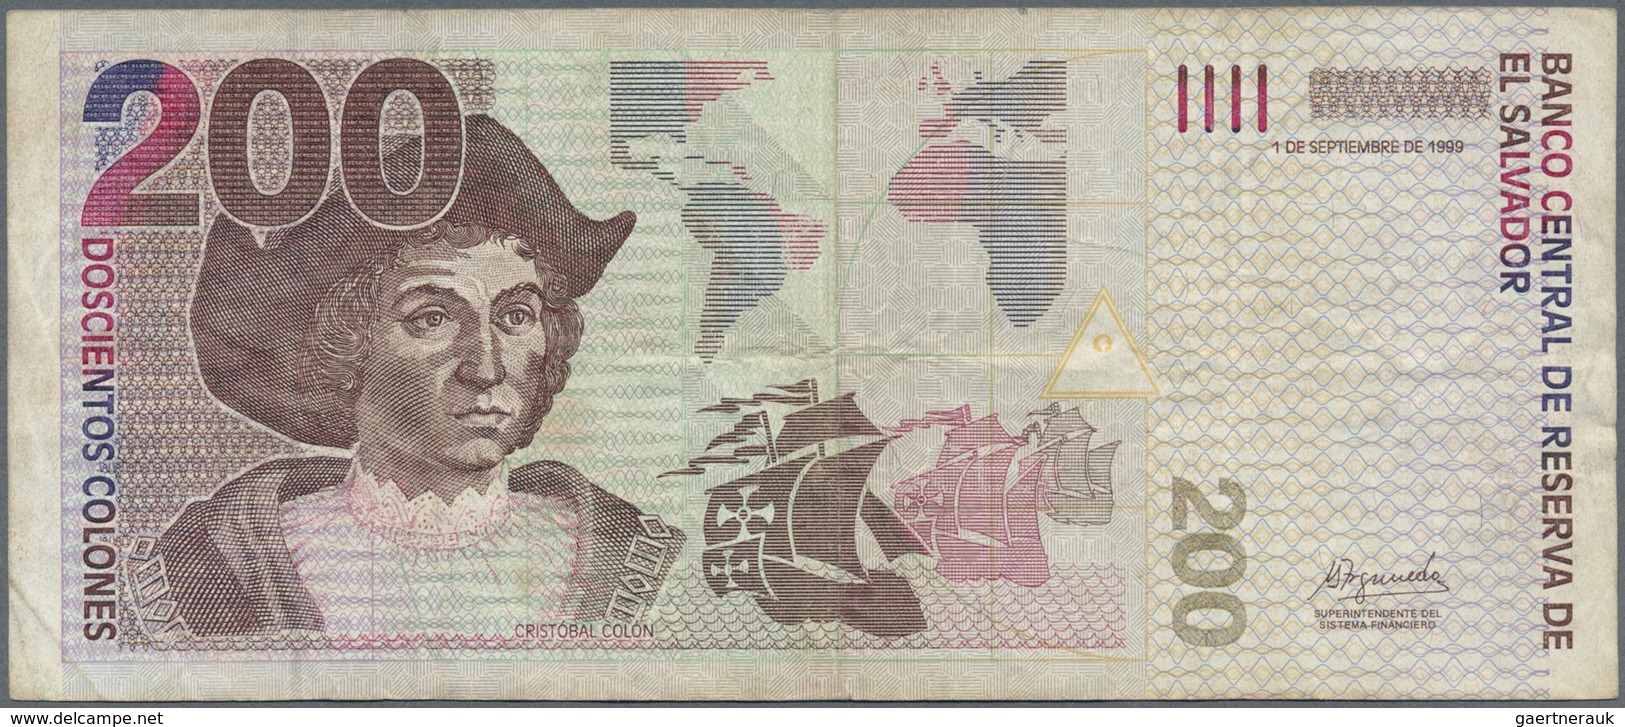 El Salvador: 200 Colones 1999 P. 158, Used With Folds And Creases, Still Strongness In Paper And Nic - El Salvador